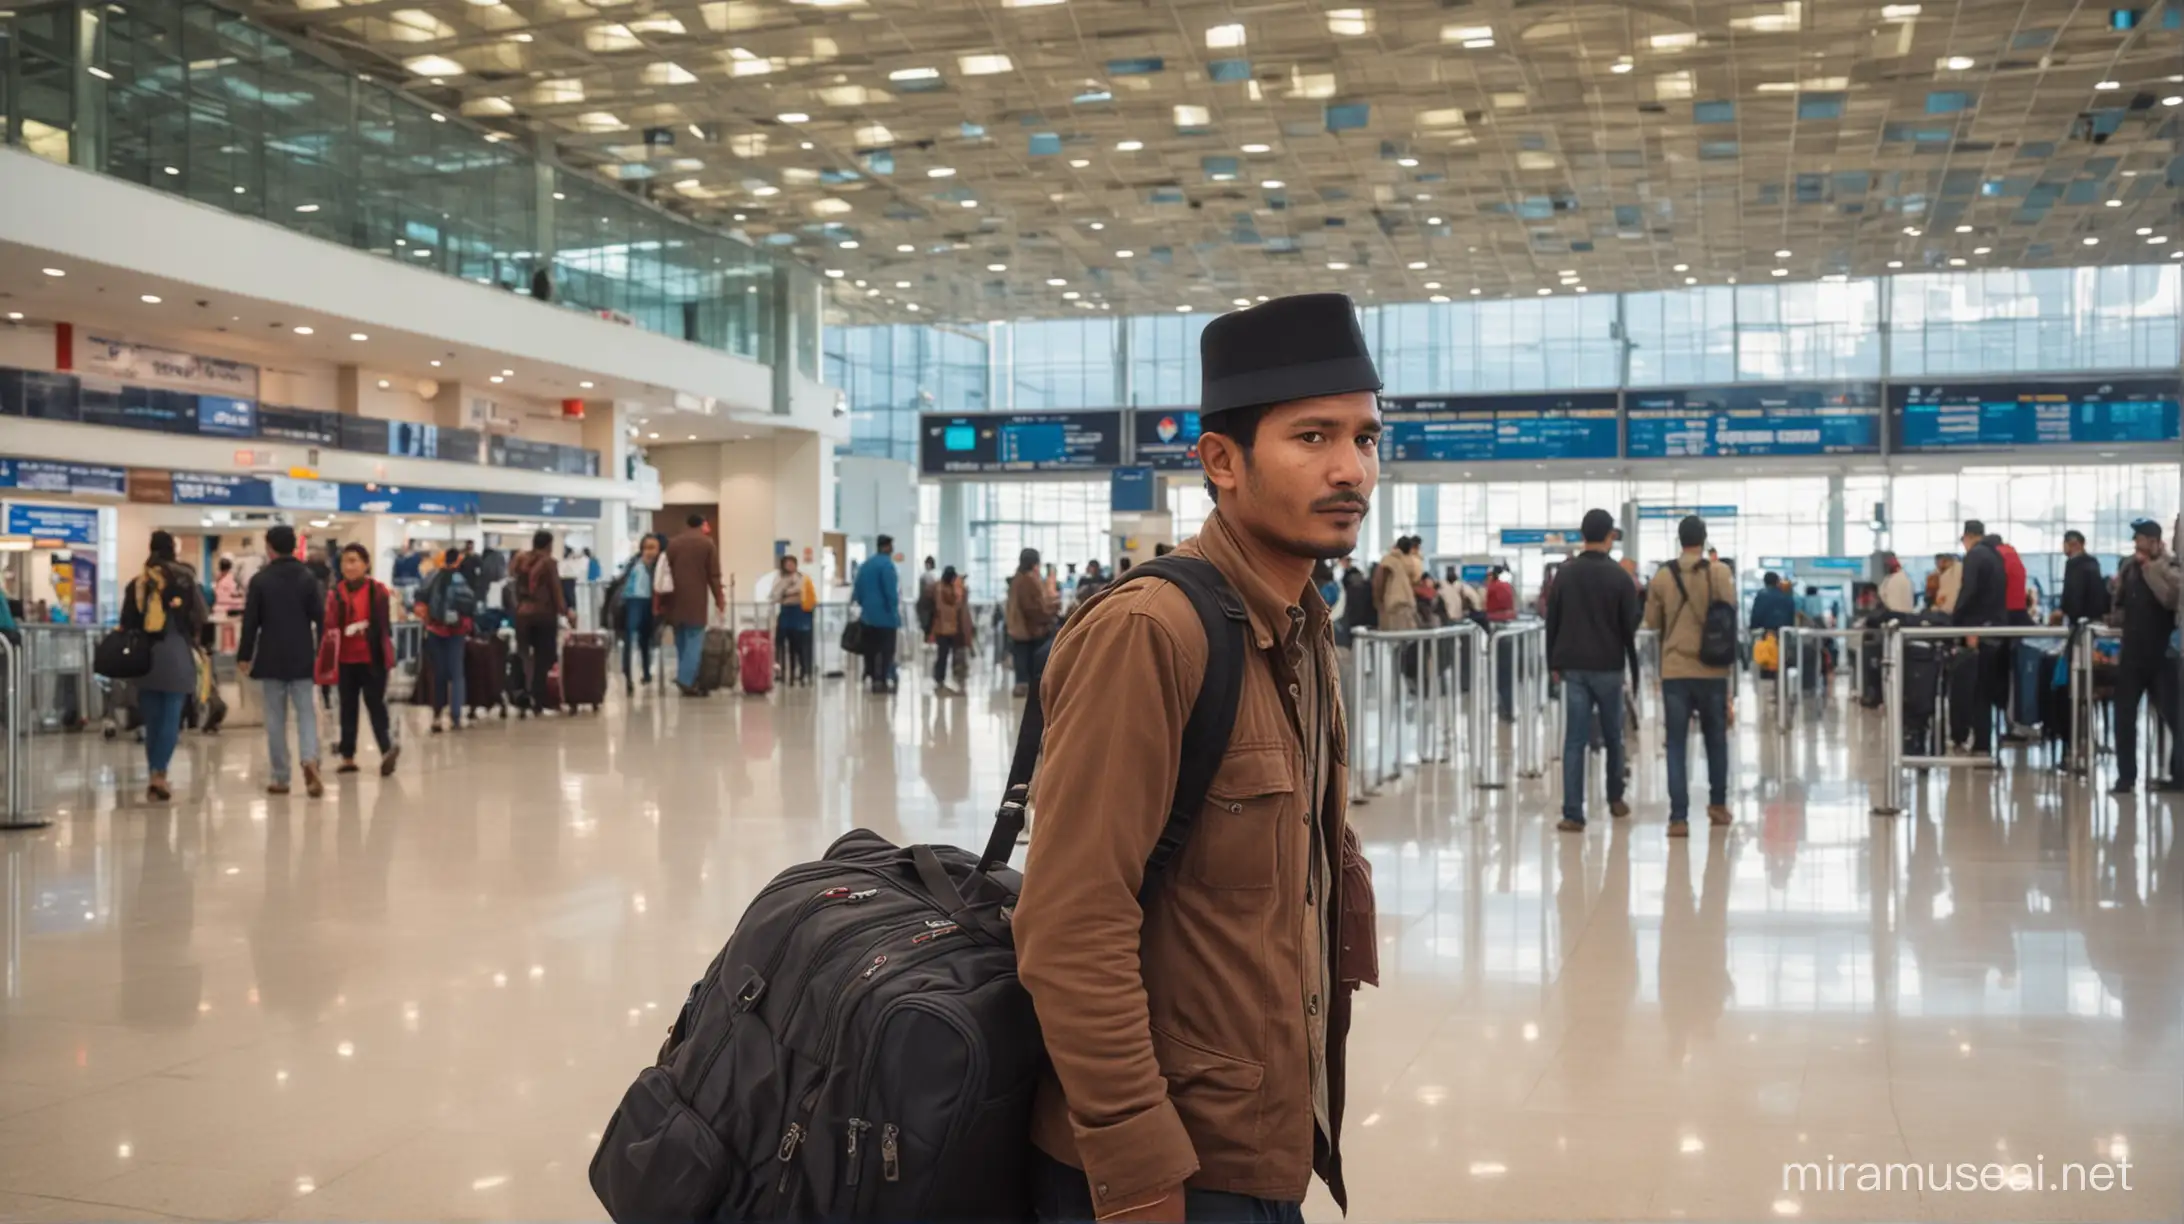 A Nepali man in a airport of Nepal
Weariing Dhaka topi 
Ready to go to abroad with luggage in his hand
And being sad